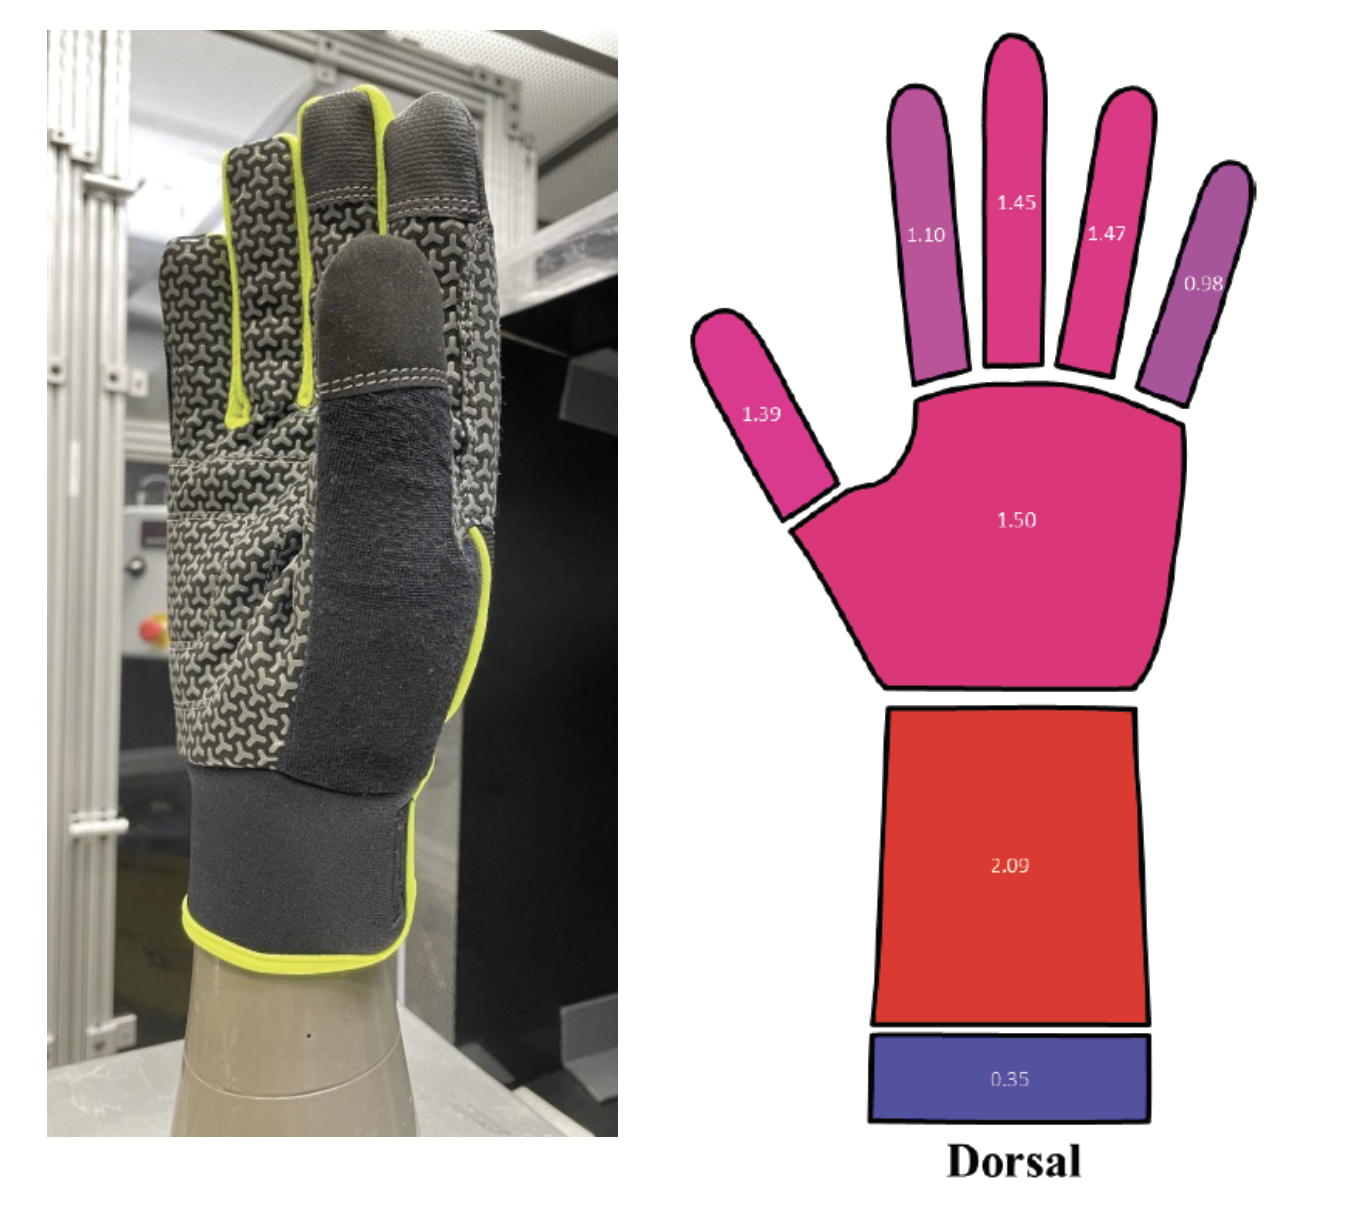 image of glove on a mannequin hand on left, drawing/diagram of a hand from a dorsal view on the right